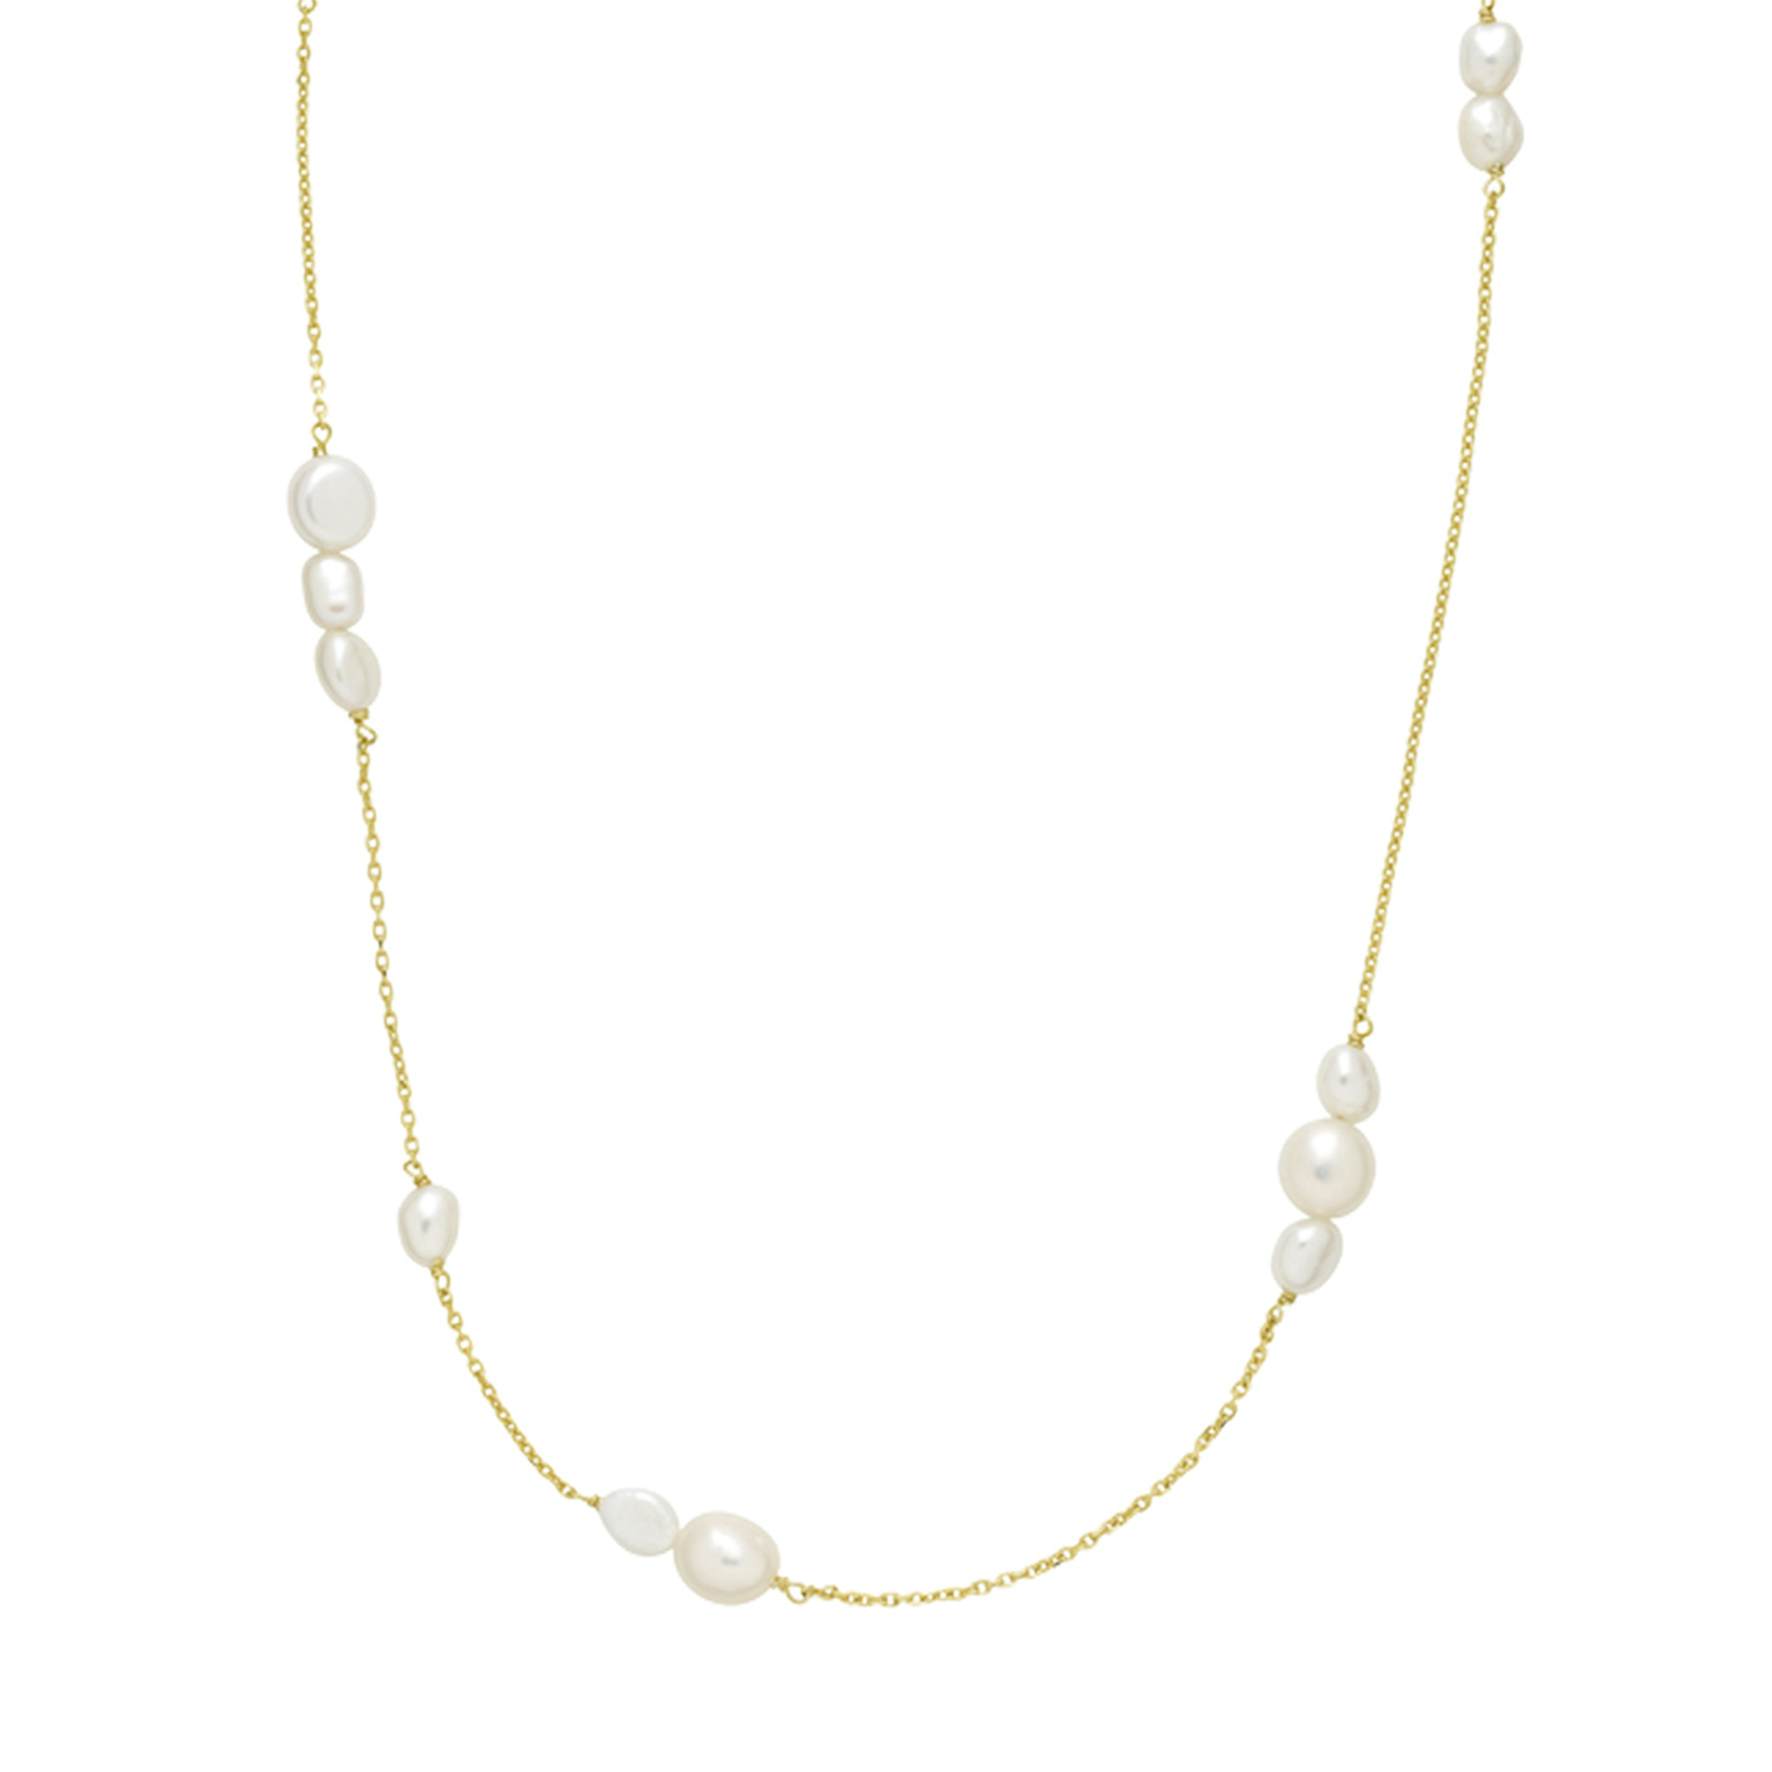 Ella by Sistie Necklace from Sistie in Goldplated-Silver Sterling 925